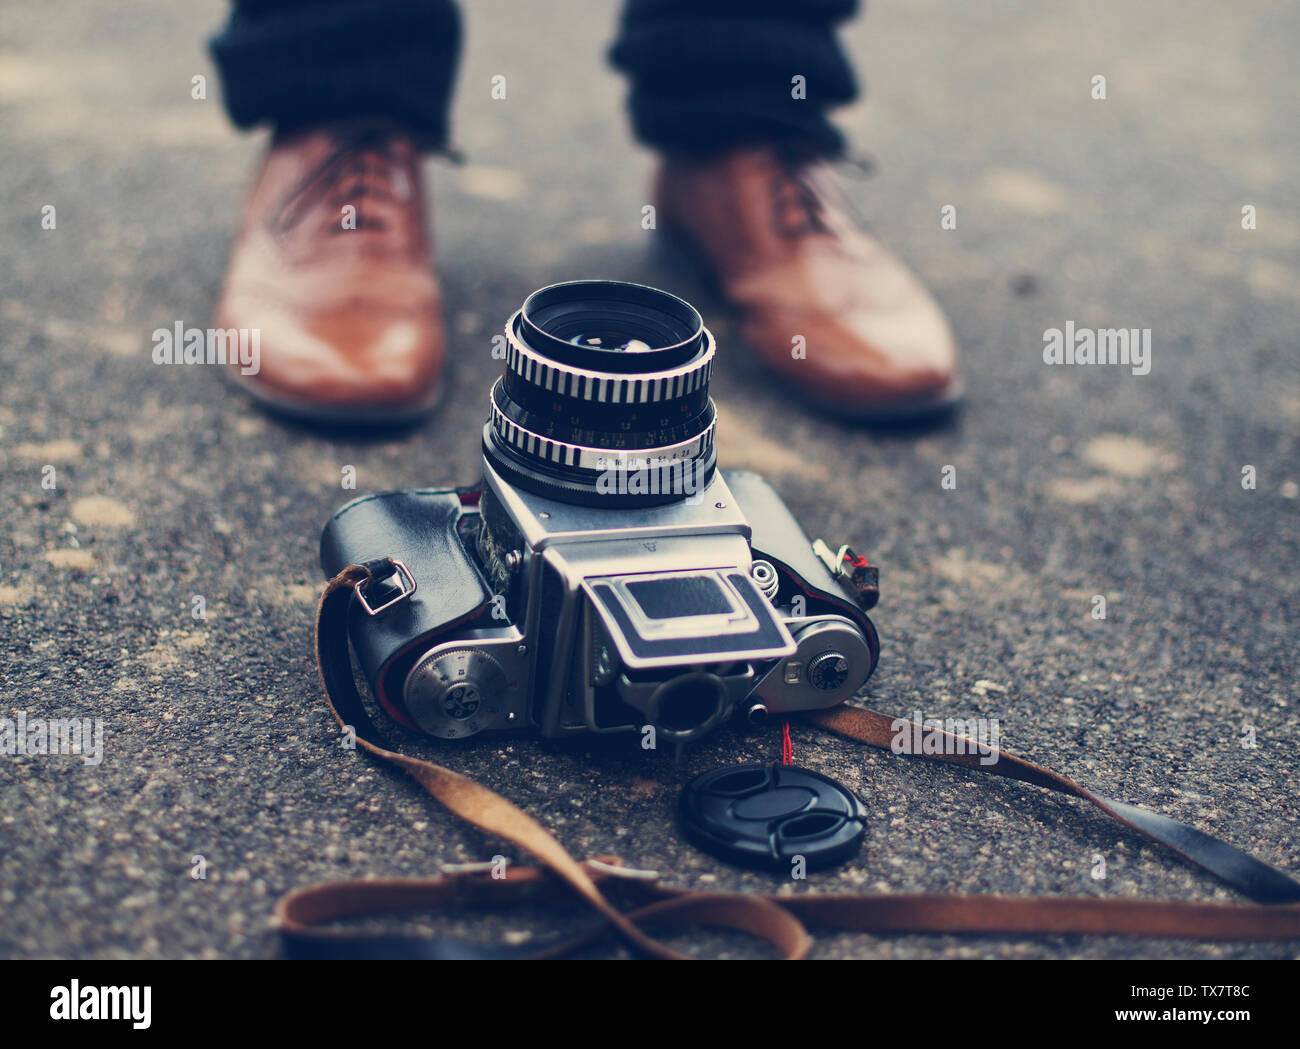 camera on a floor infront of feet Stock Photo